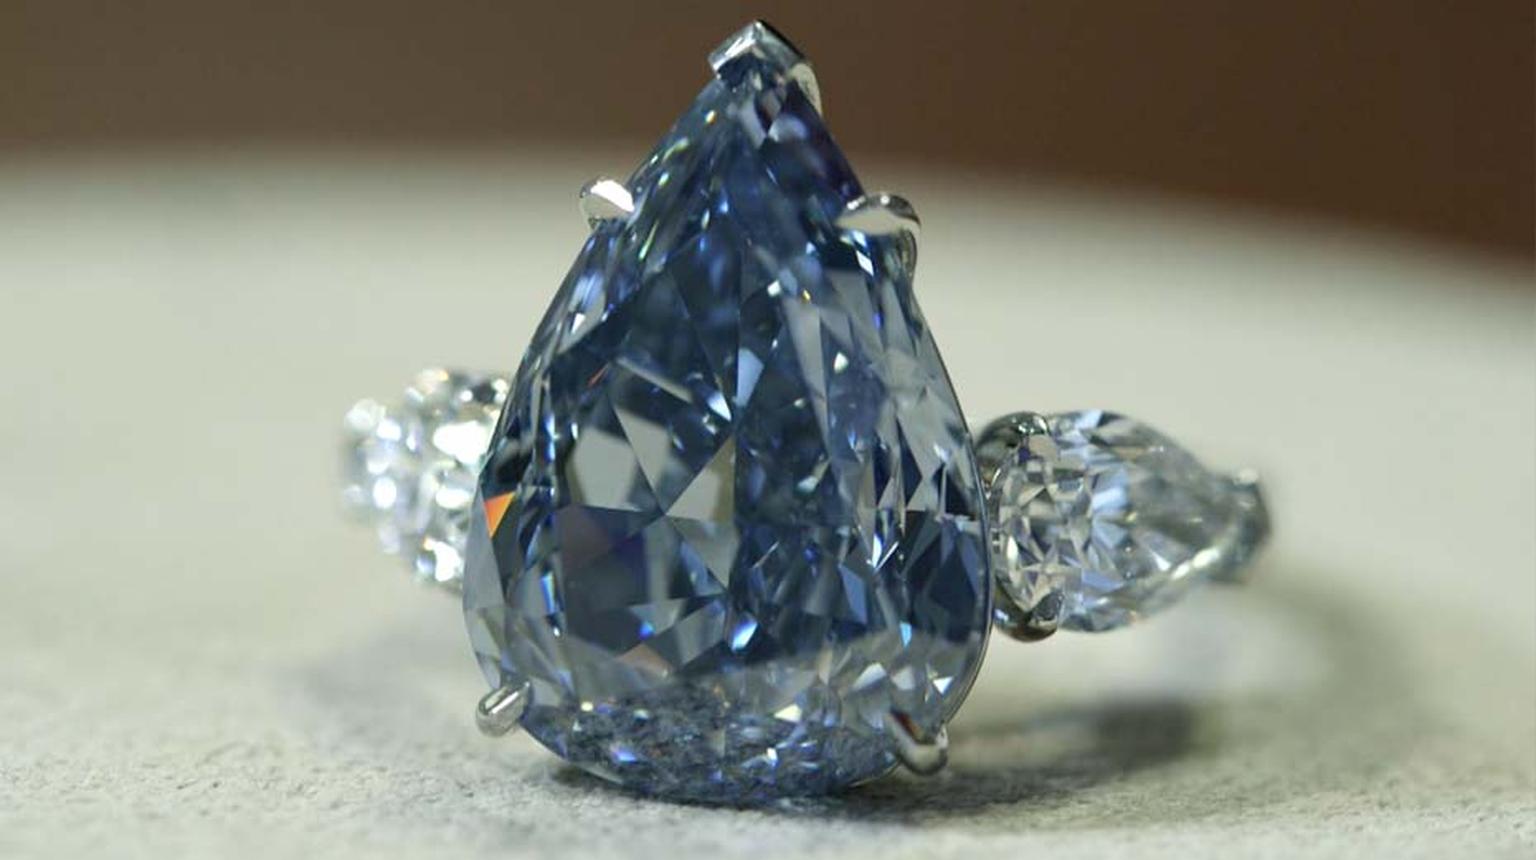 'The Blue' diamond - at 13.22ct the world's largest flawless Vivid blue diamond - leads Christie's Magnificent Jewels auction in Geneva on 14 May 2014